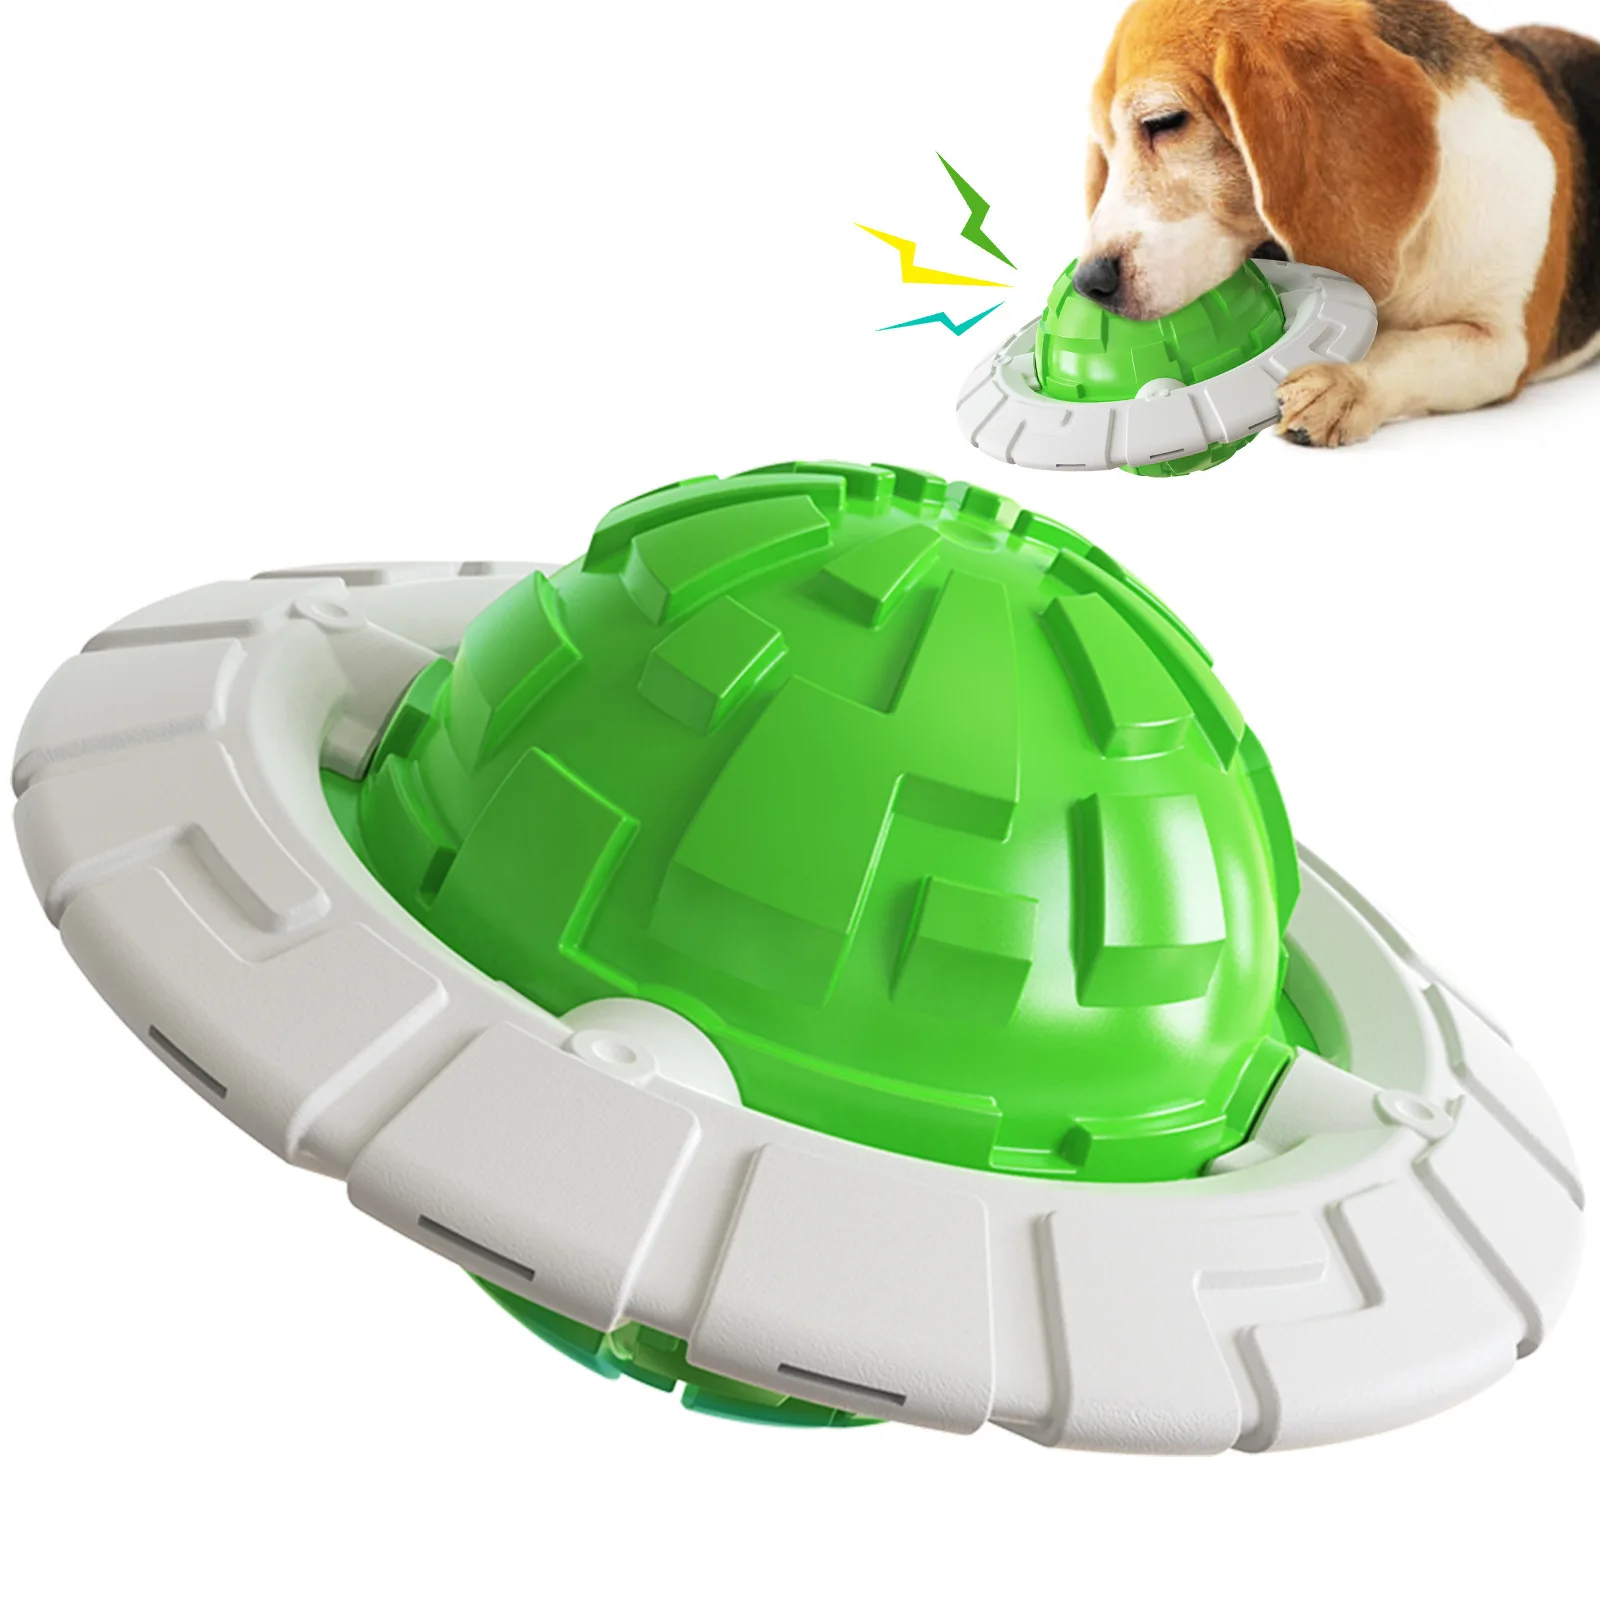 

Pet supplies dog toy vocal interactive flying saucer molar ball resistant to chewing molar stick training toy floating on water